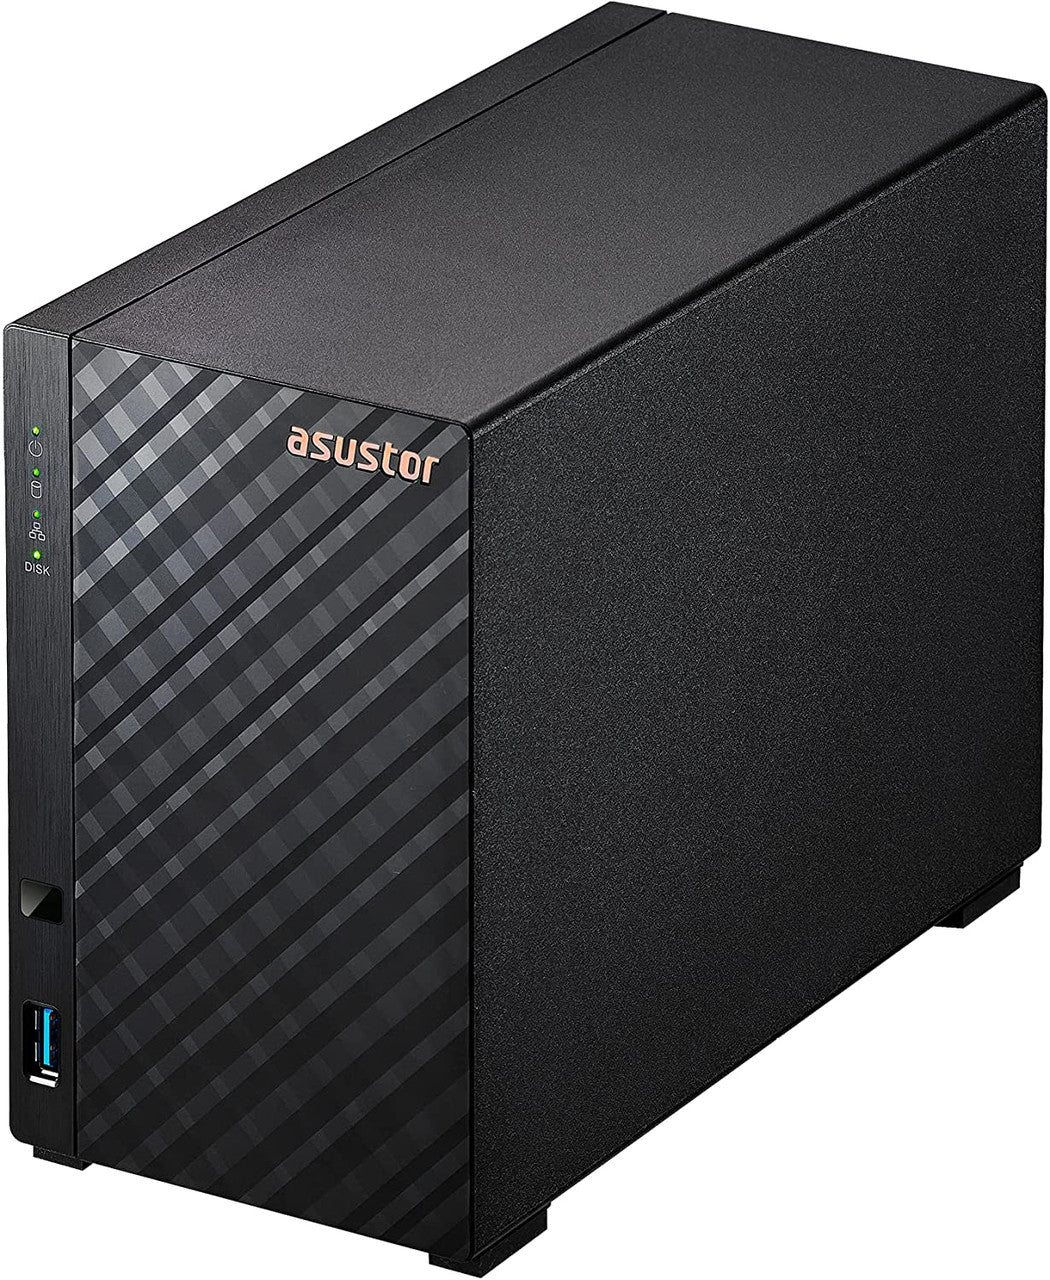 Asustor AS1102T 2-Bay Drivestor 2 NAS with 1GB RAM and 20TB (2x10TB) Western Digital RED PRO Drives